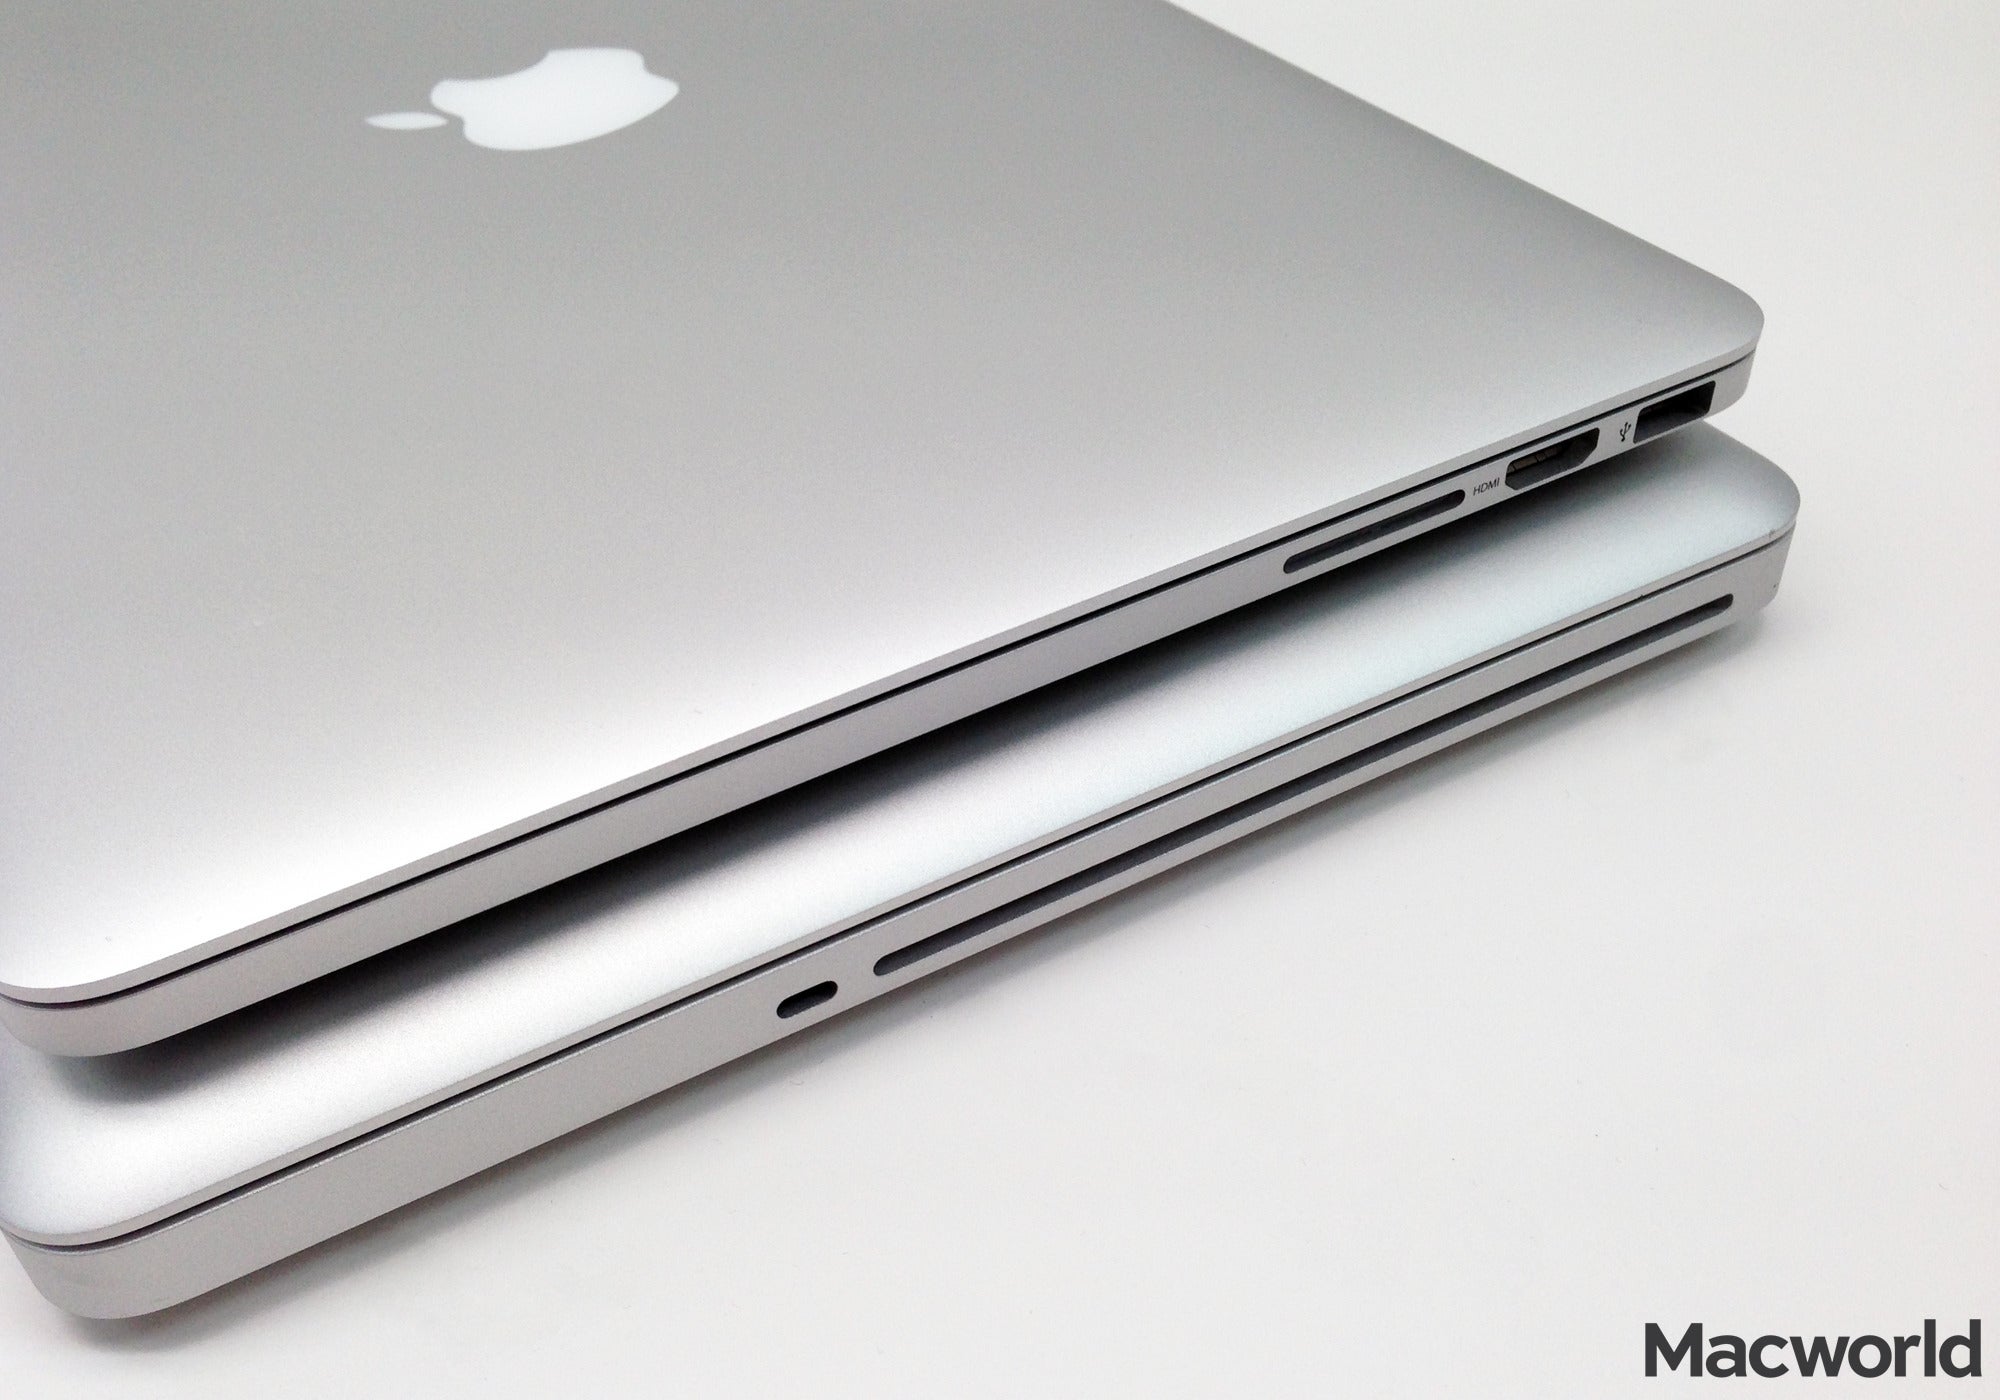 Review: 13-inch Retina MacBook Pro offers optimal choice for